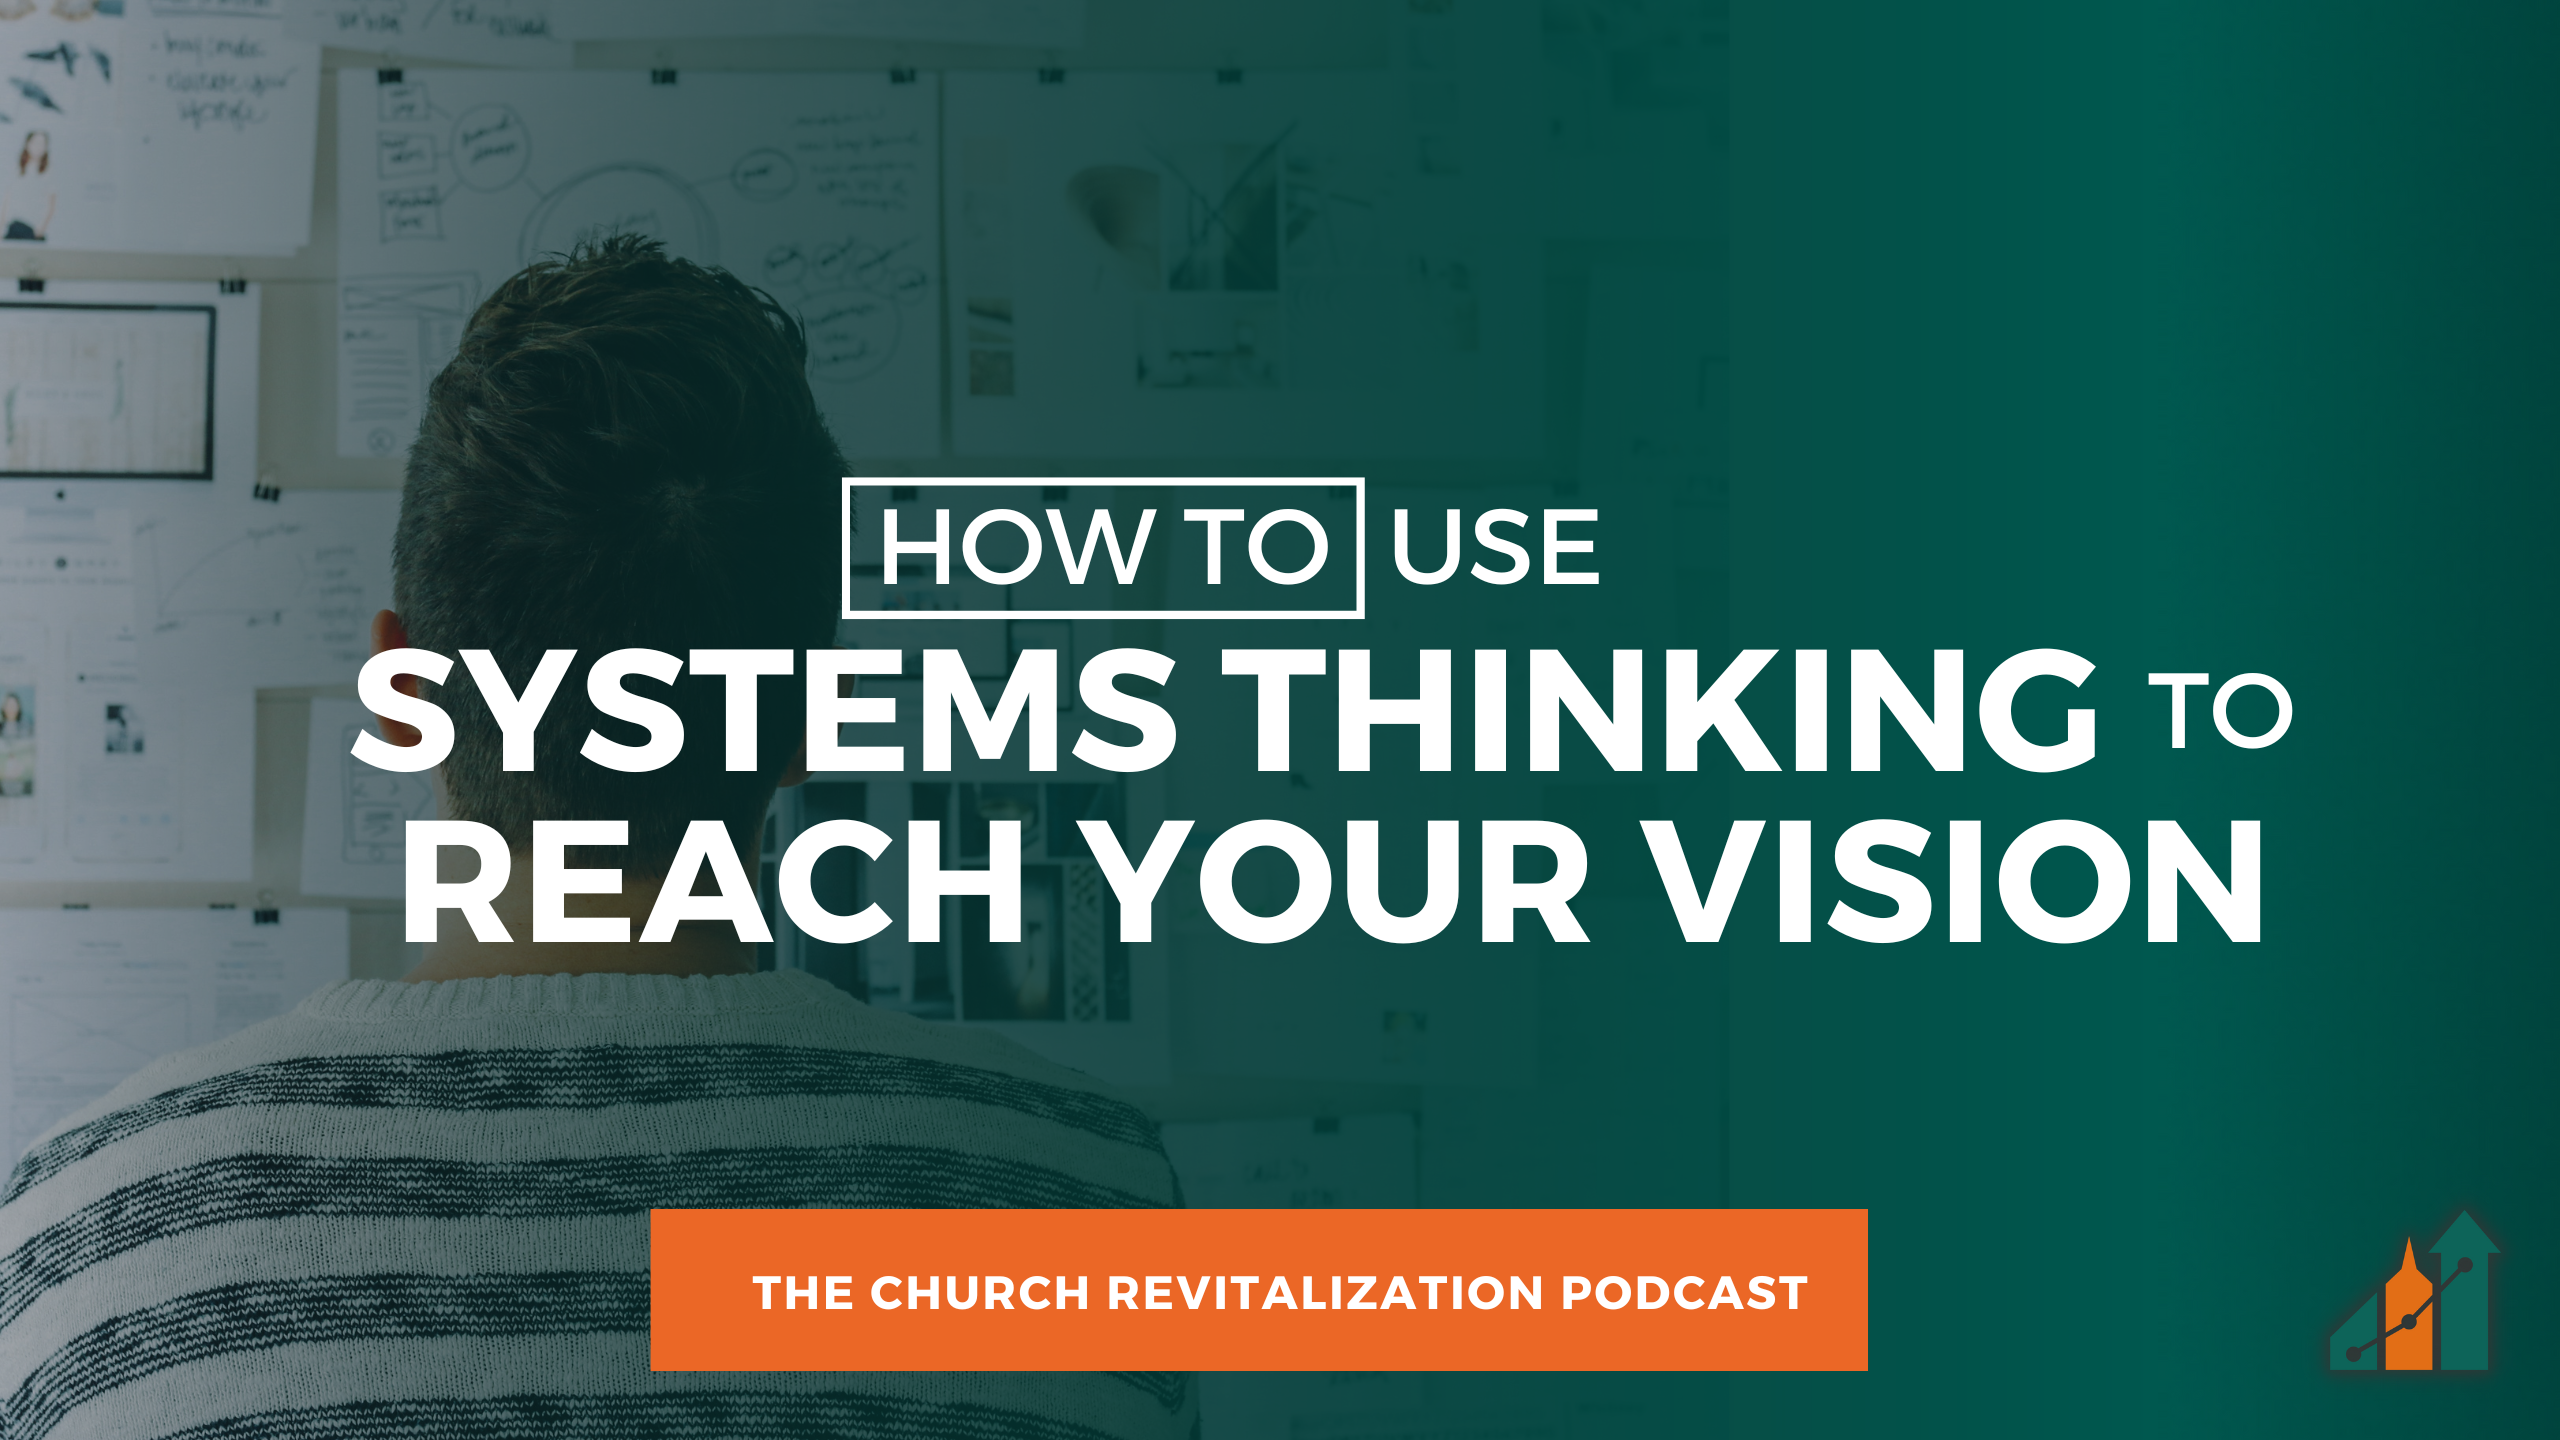 How to Use Systems Thinking to Reach Your Vision